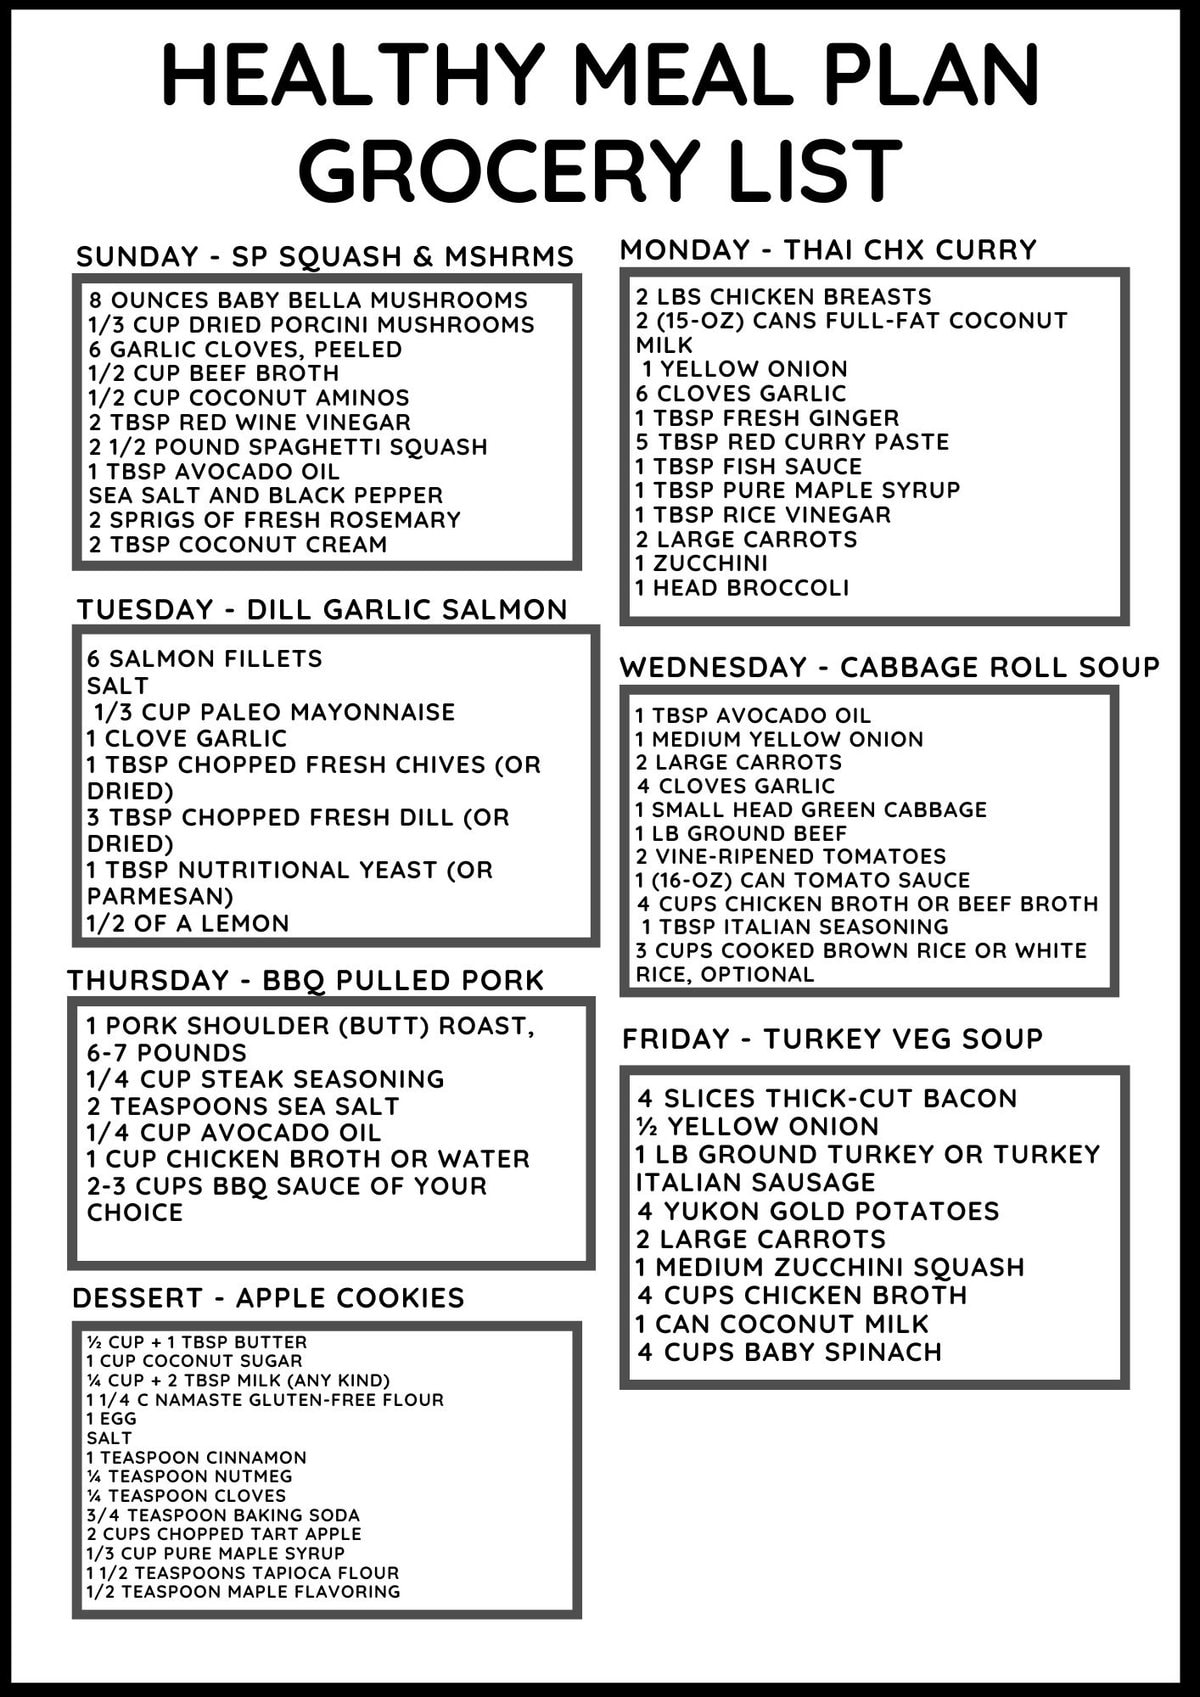 Meal plan grocery list